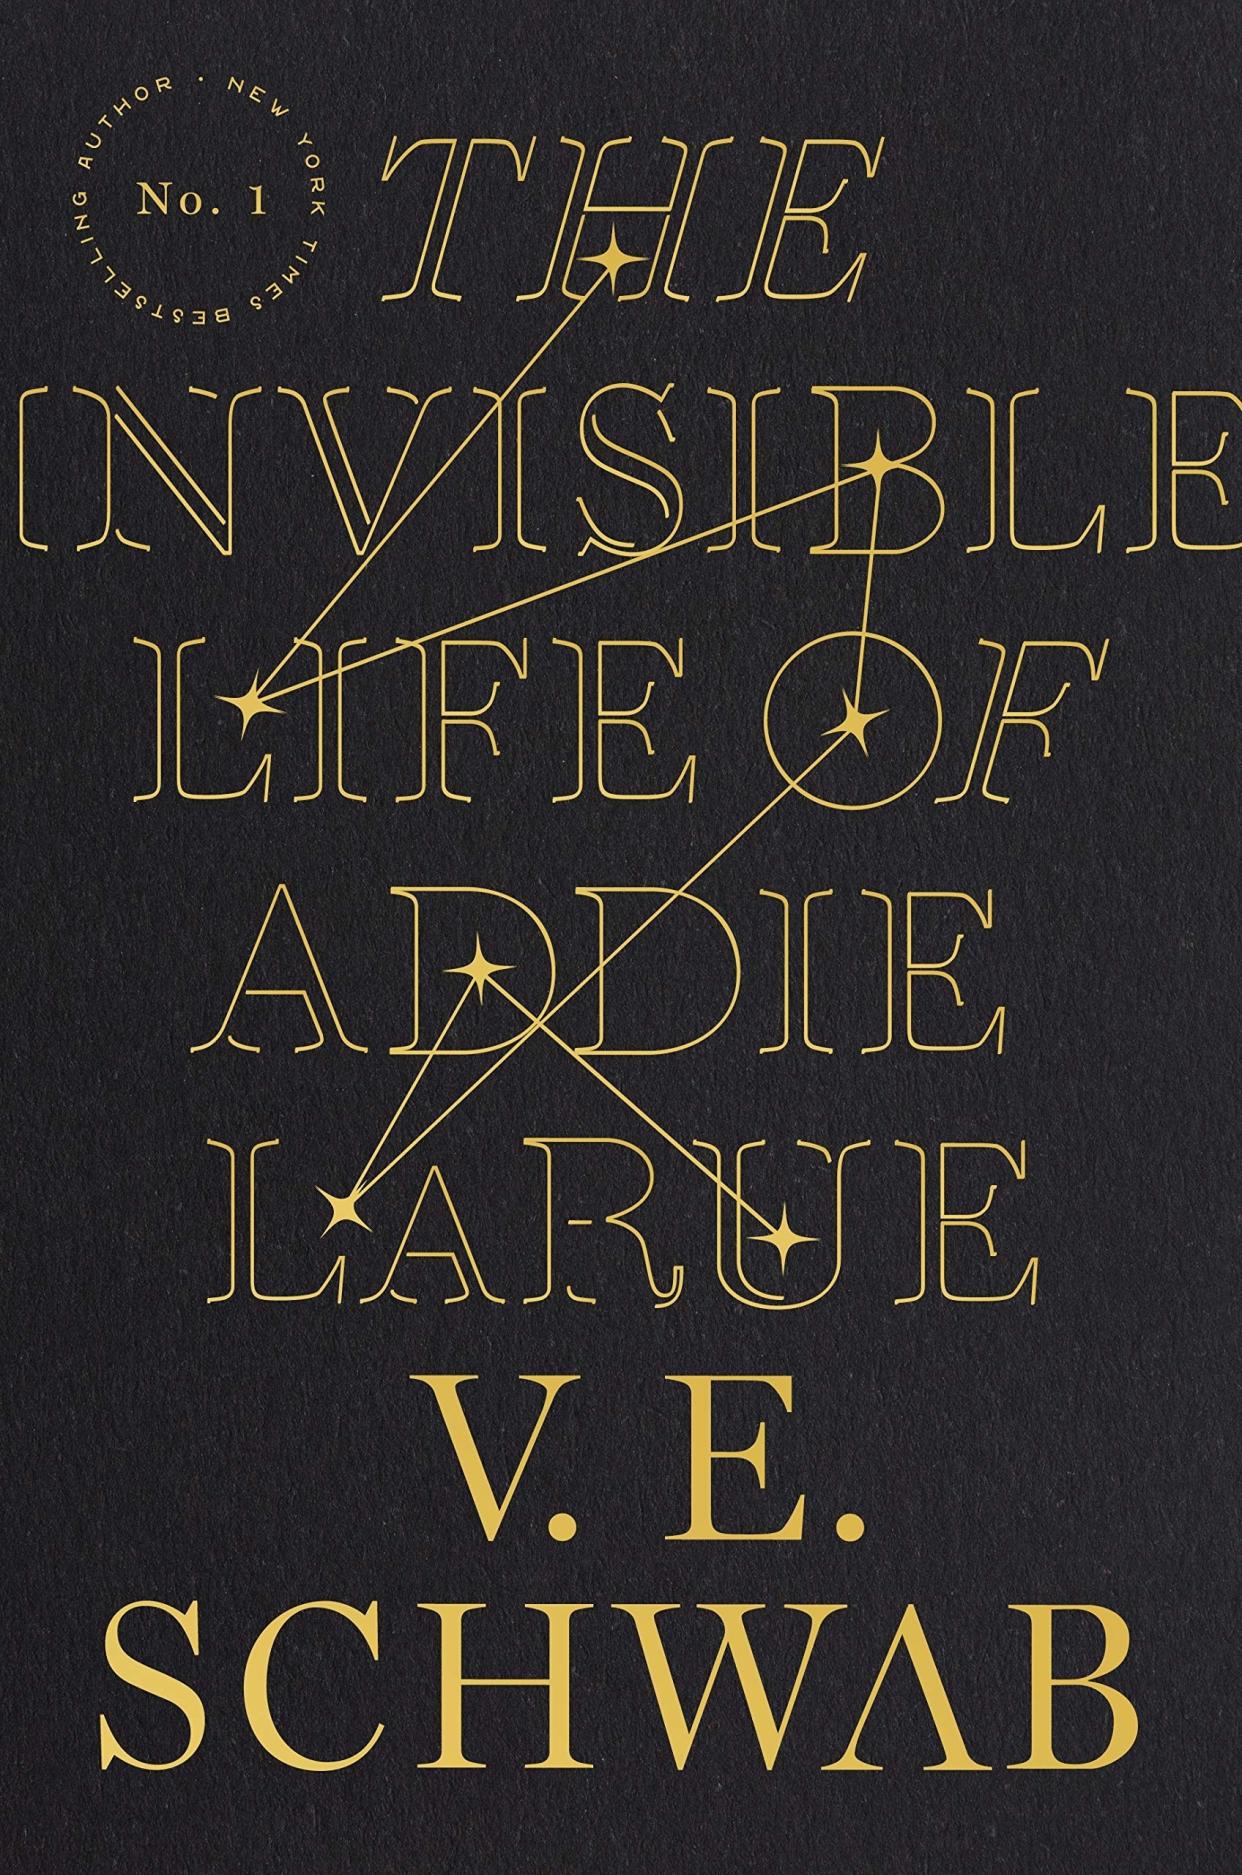 Book cover of "The Invisible life of addie larule"